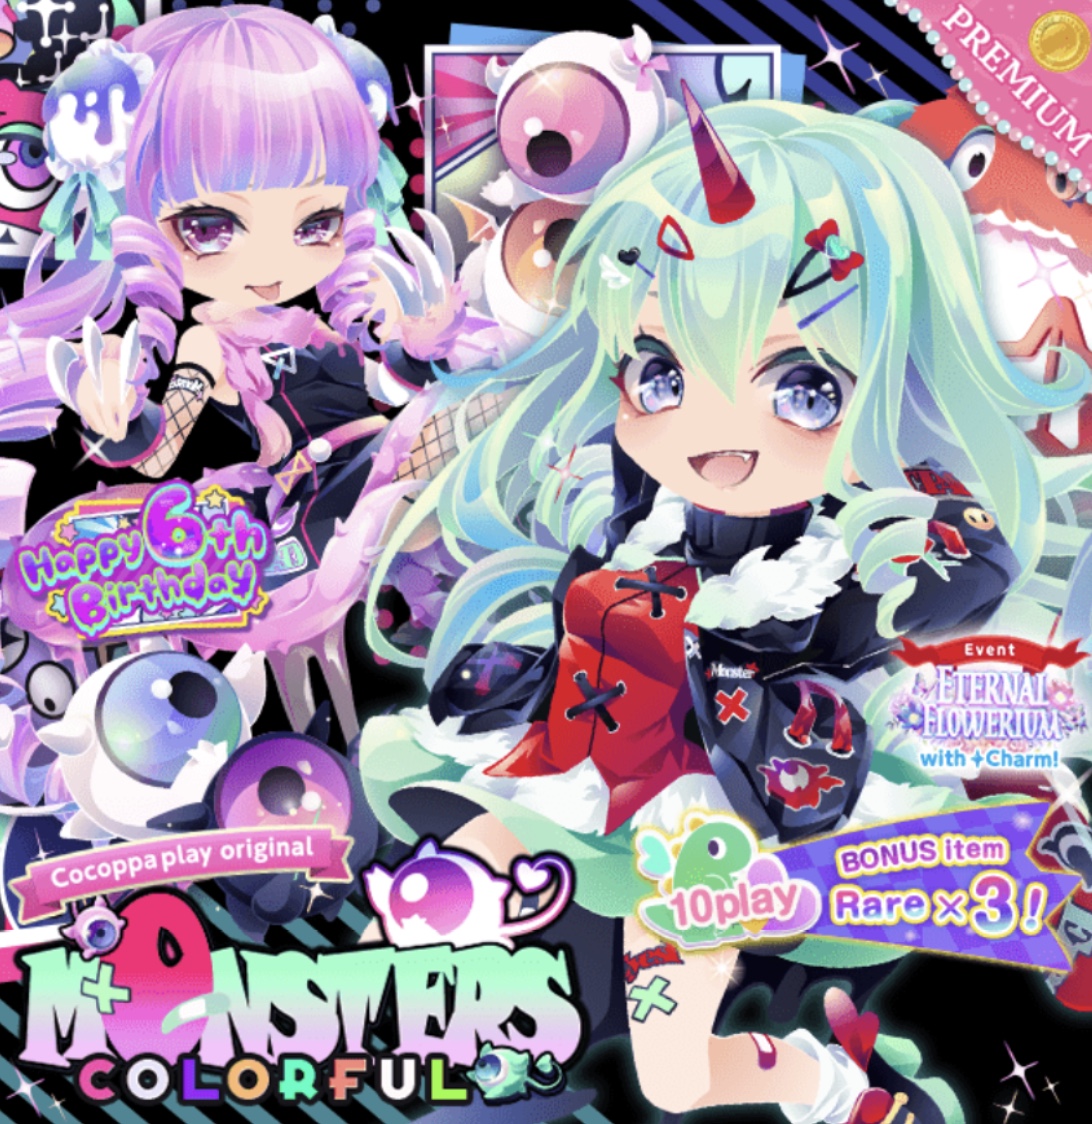 Colorfulmonster Cocoppa Play